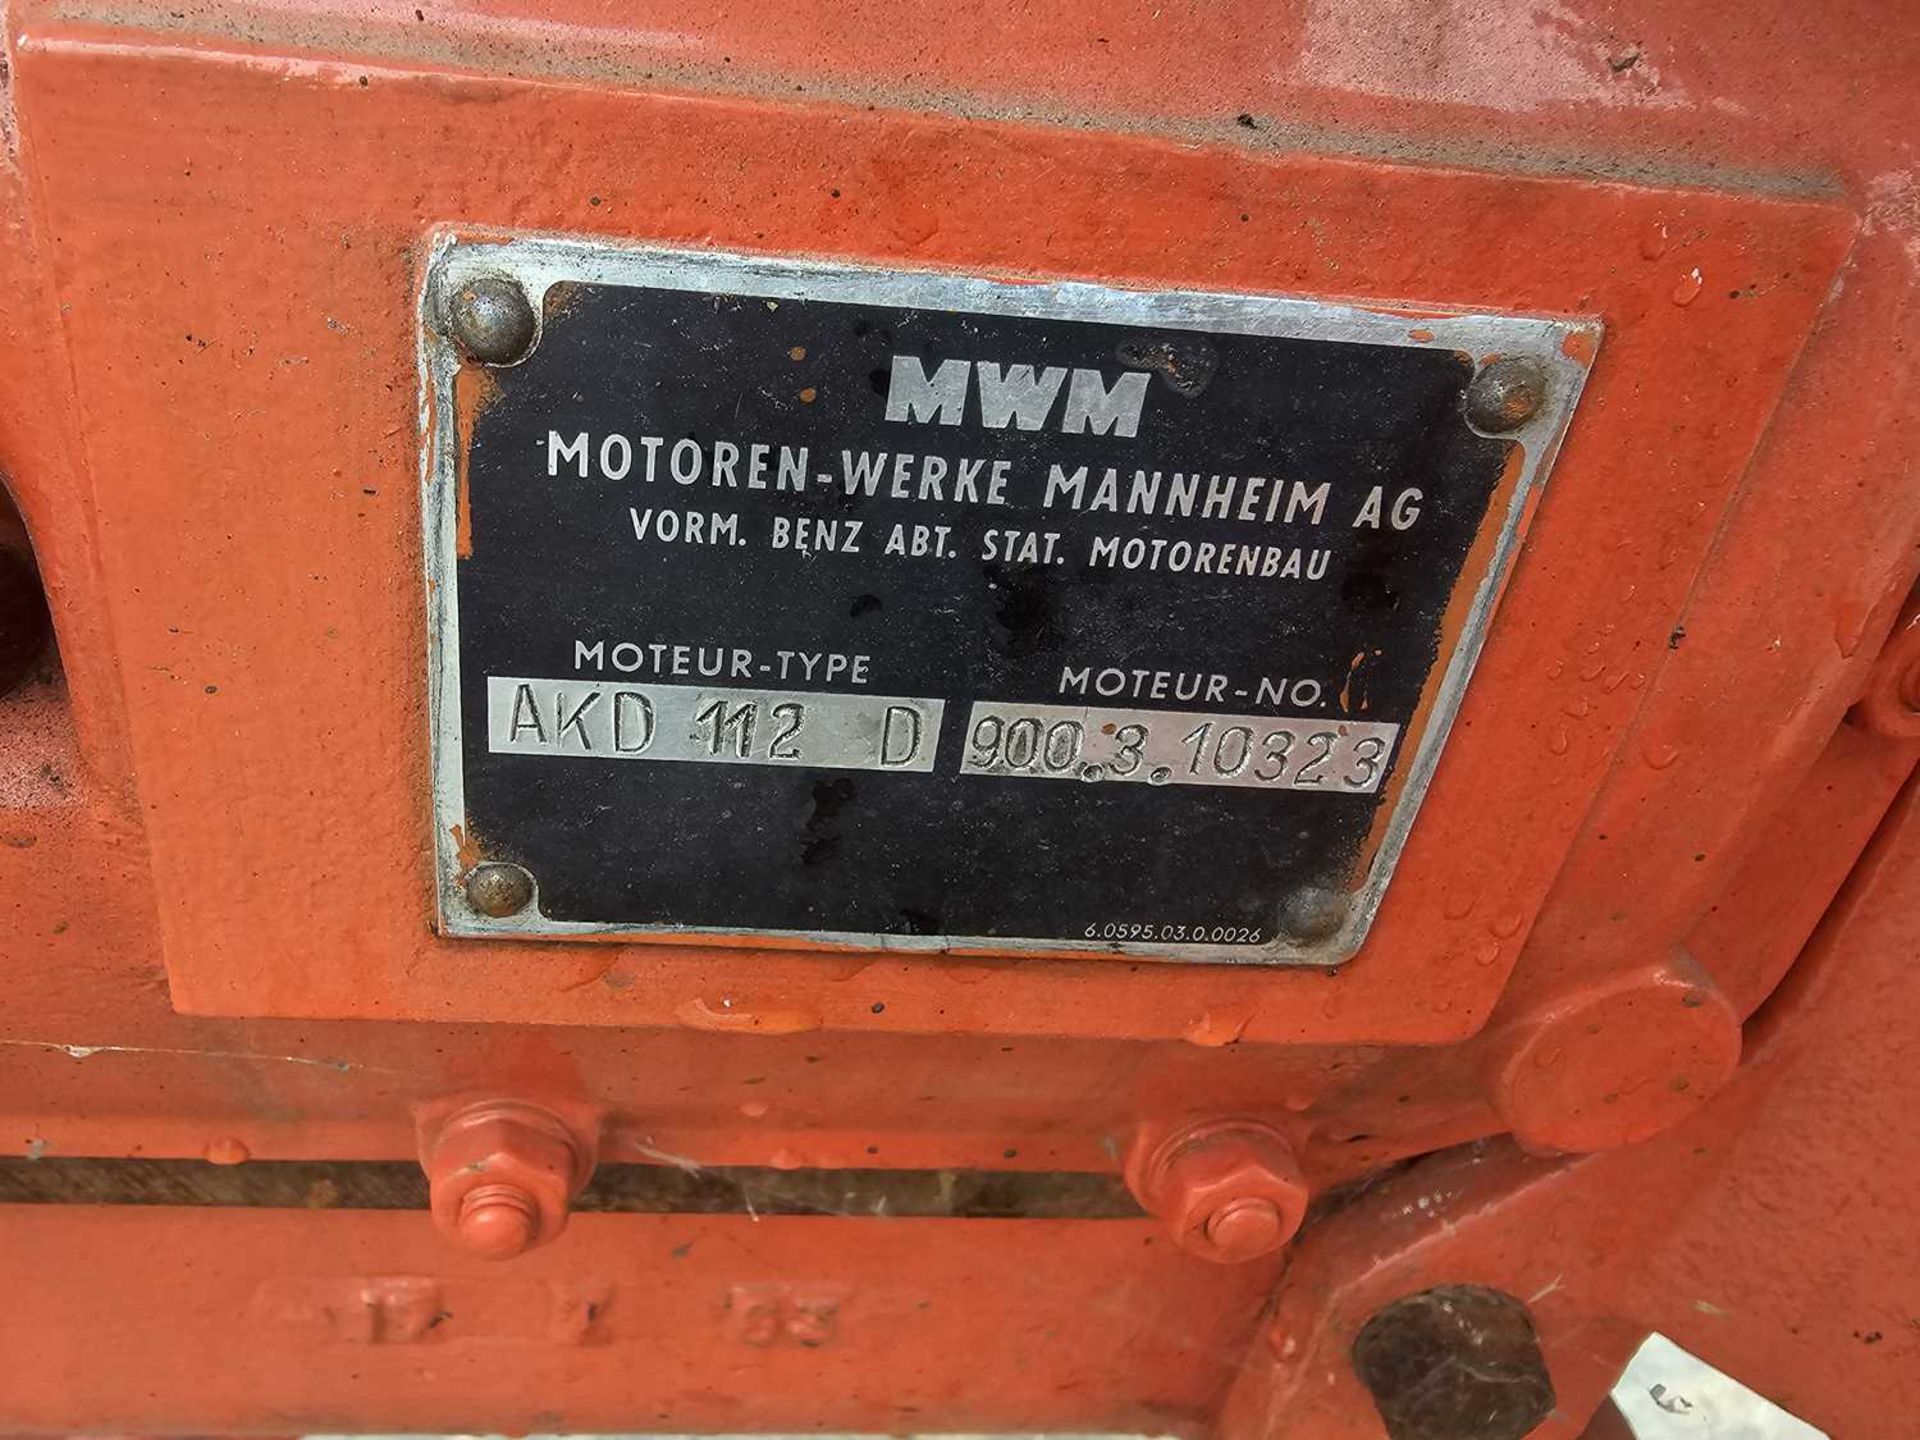 Renault N70 2WD Tractor (Part Restored) - Image 14 of 19